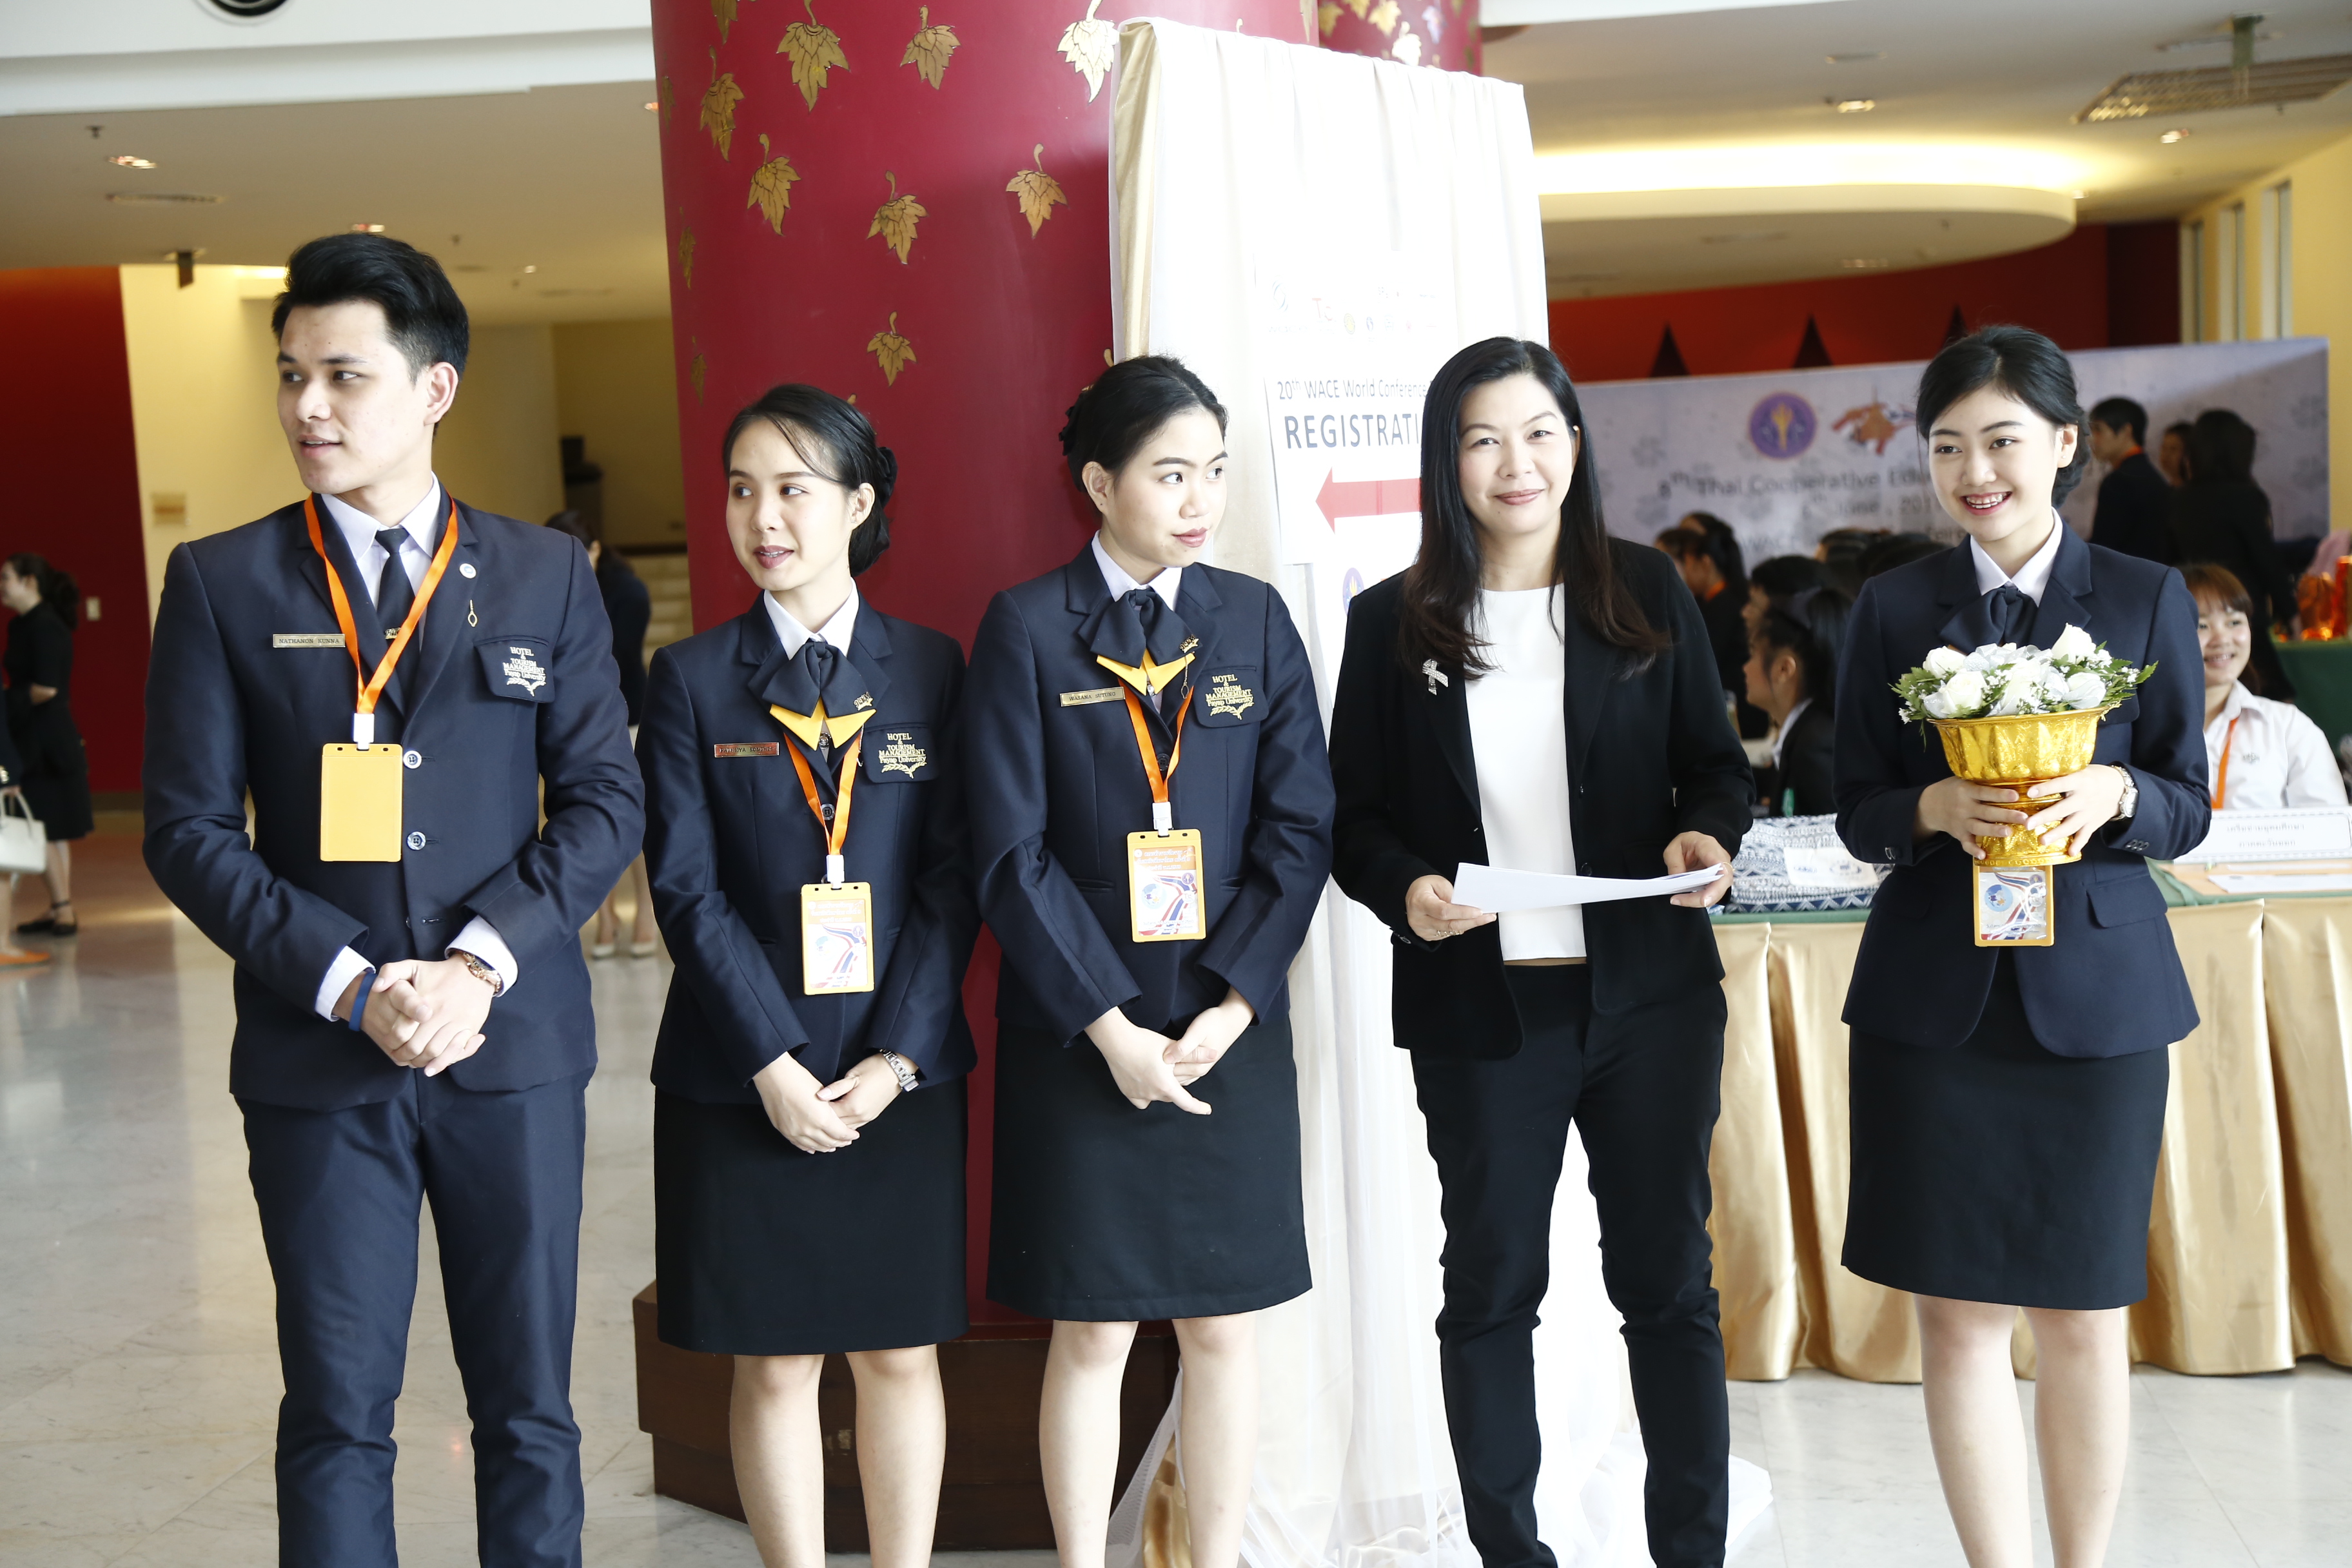 RMUTL operated the event “8th Thai Cooperative Education Day”